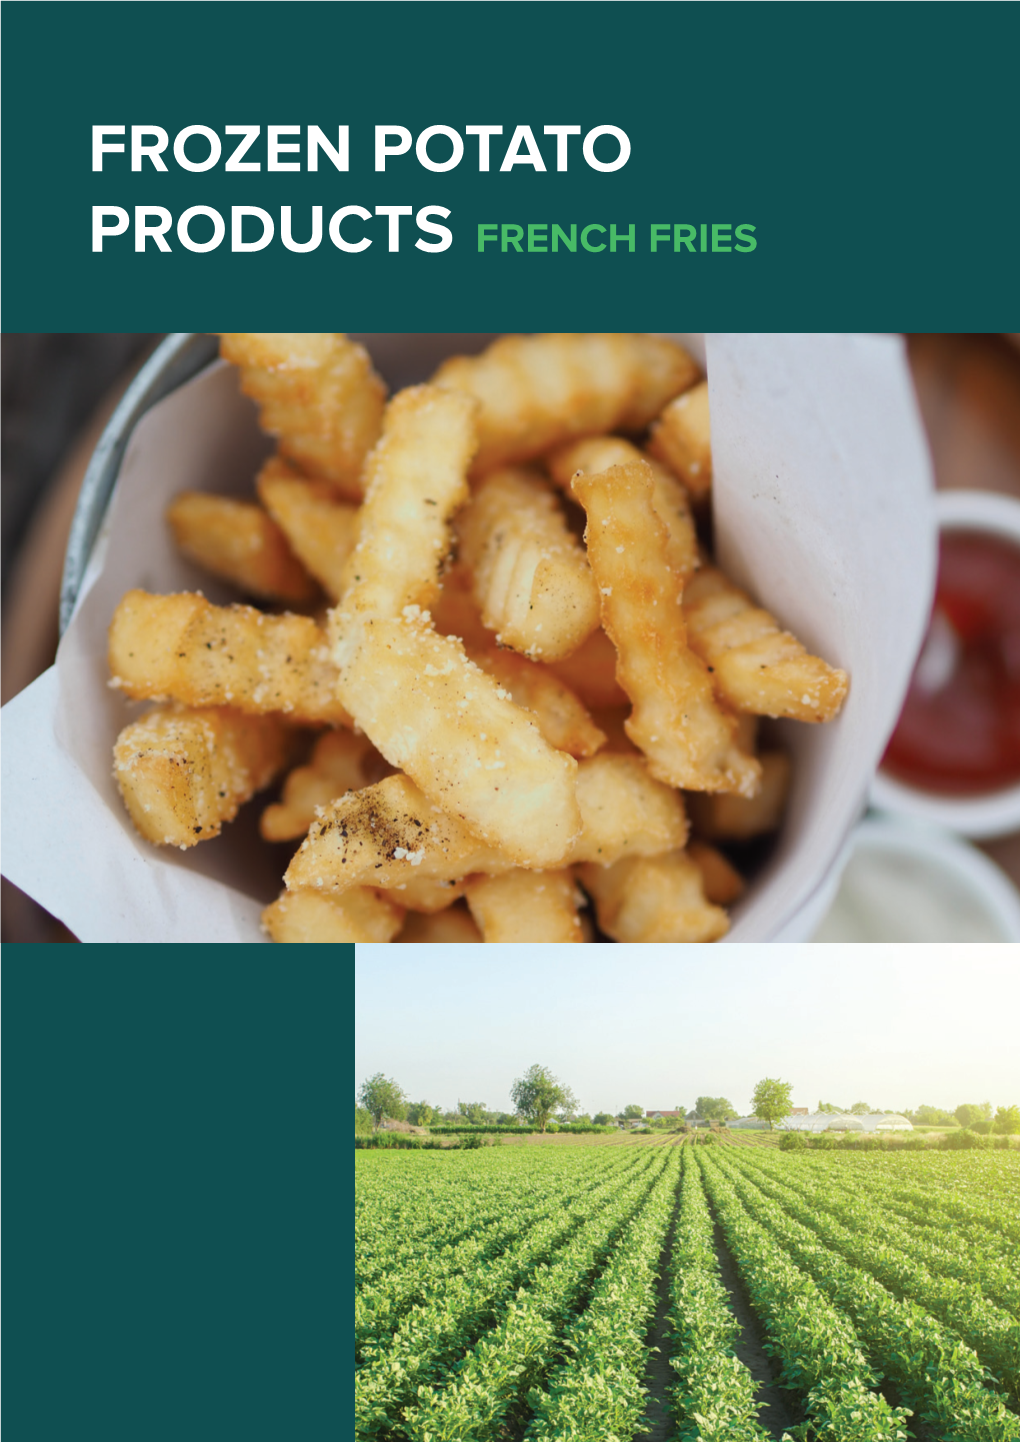 FROZEN POTATO PRODUCTS FRENCH FRIES We Supply French Fries and Specialty Potato Products to Every Continent